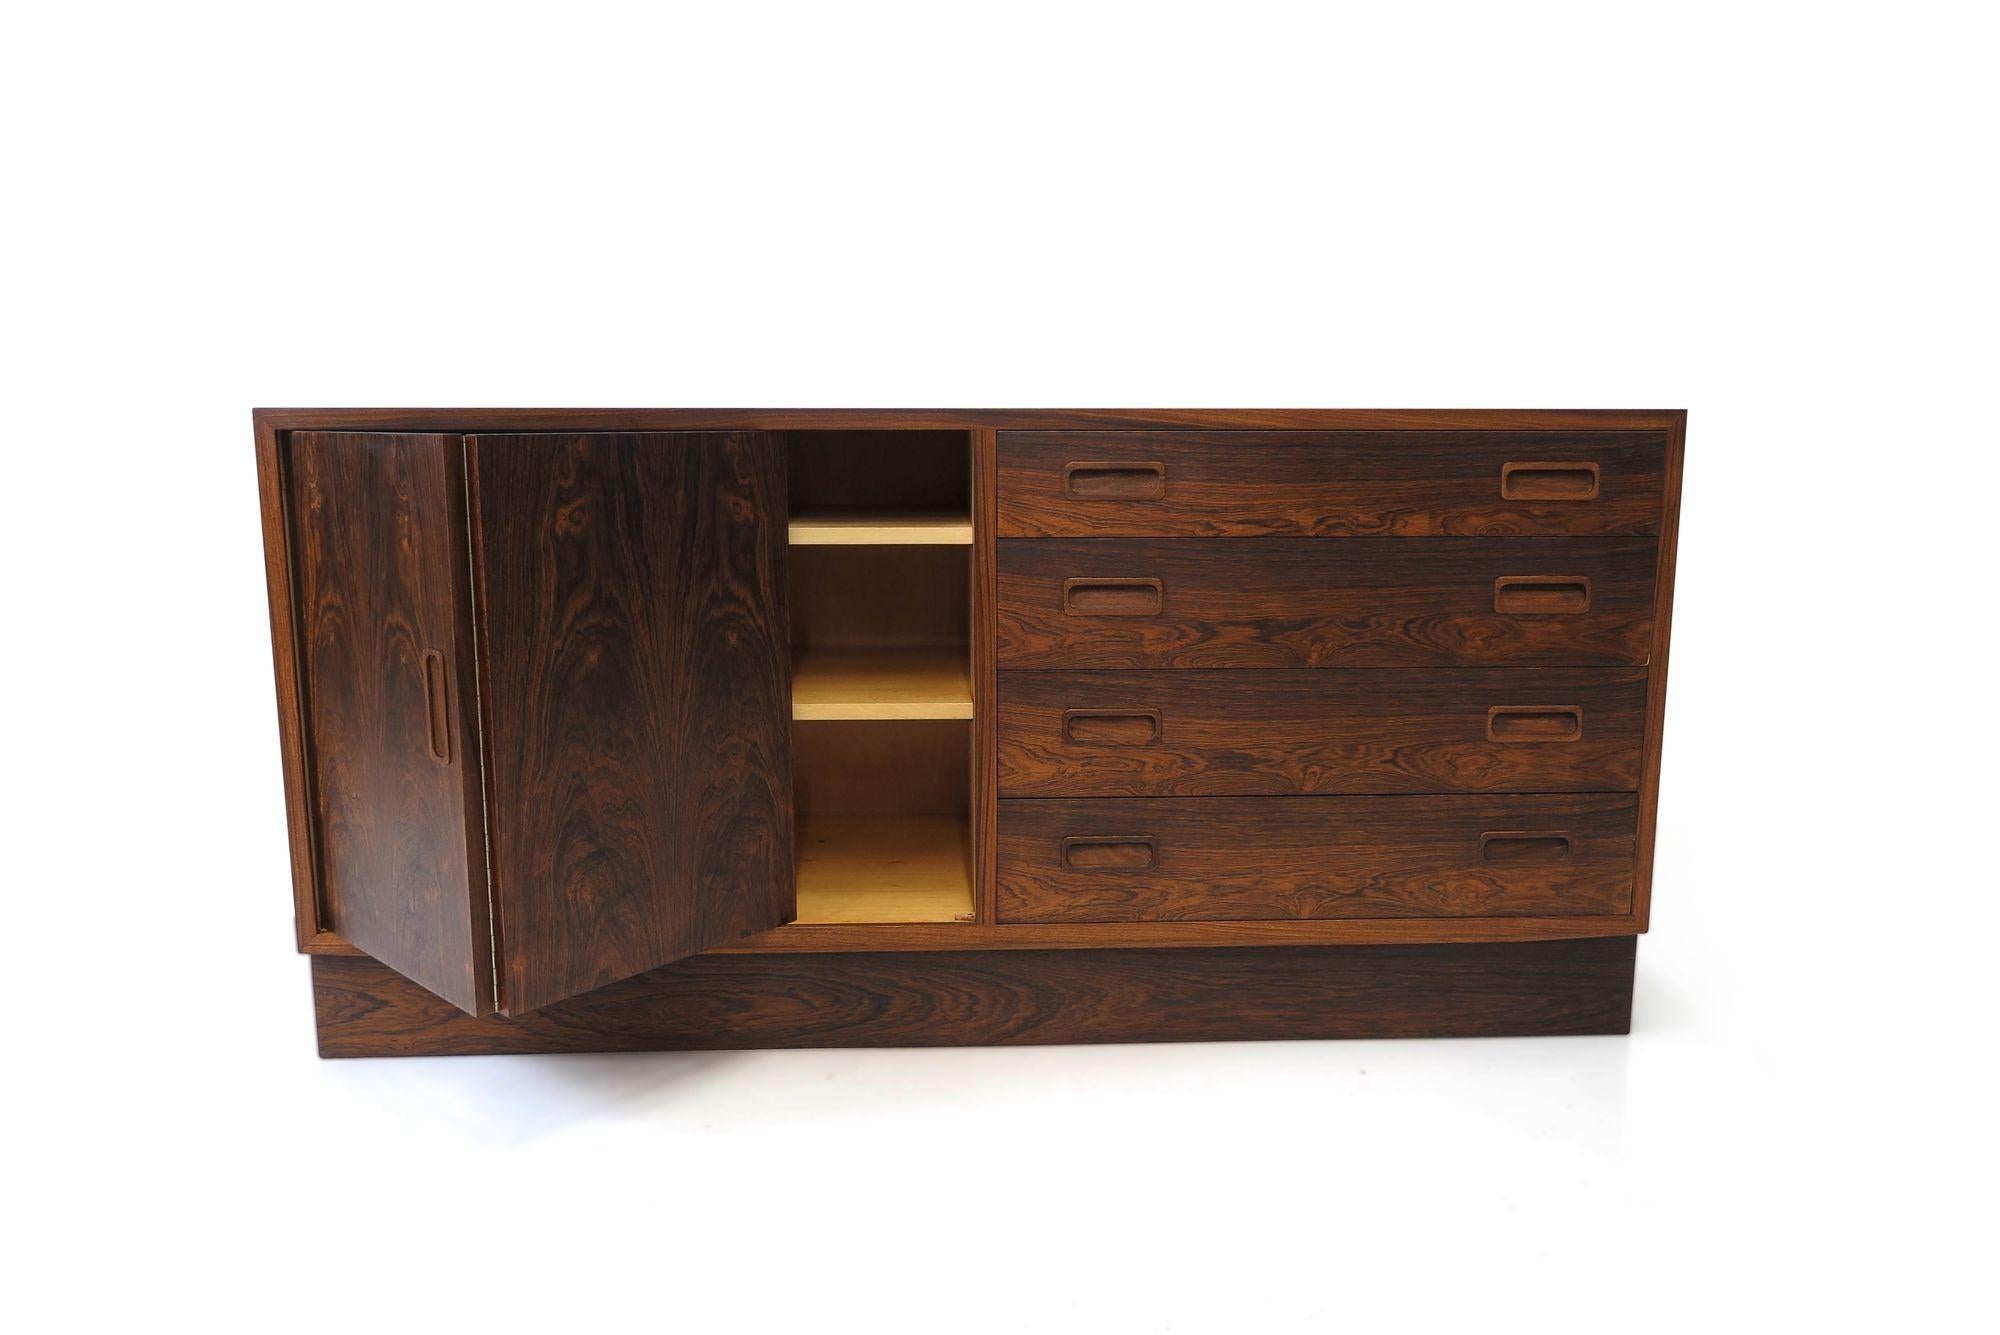 Danish rosewood cabinet handcrafted of stunning Brazilian rosewood with book-matched grains across the front, mitered corners on the cabinet, two bi-fold doors with adjustable shelves, and series of four drawers. The cabinet is raised on a plinth